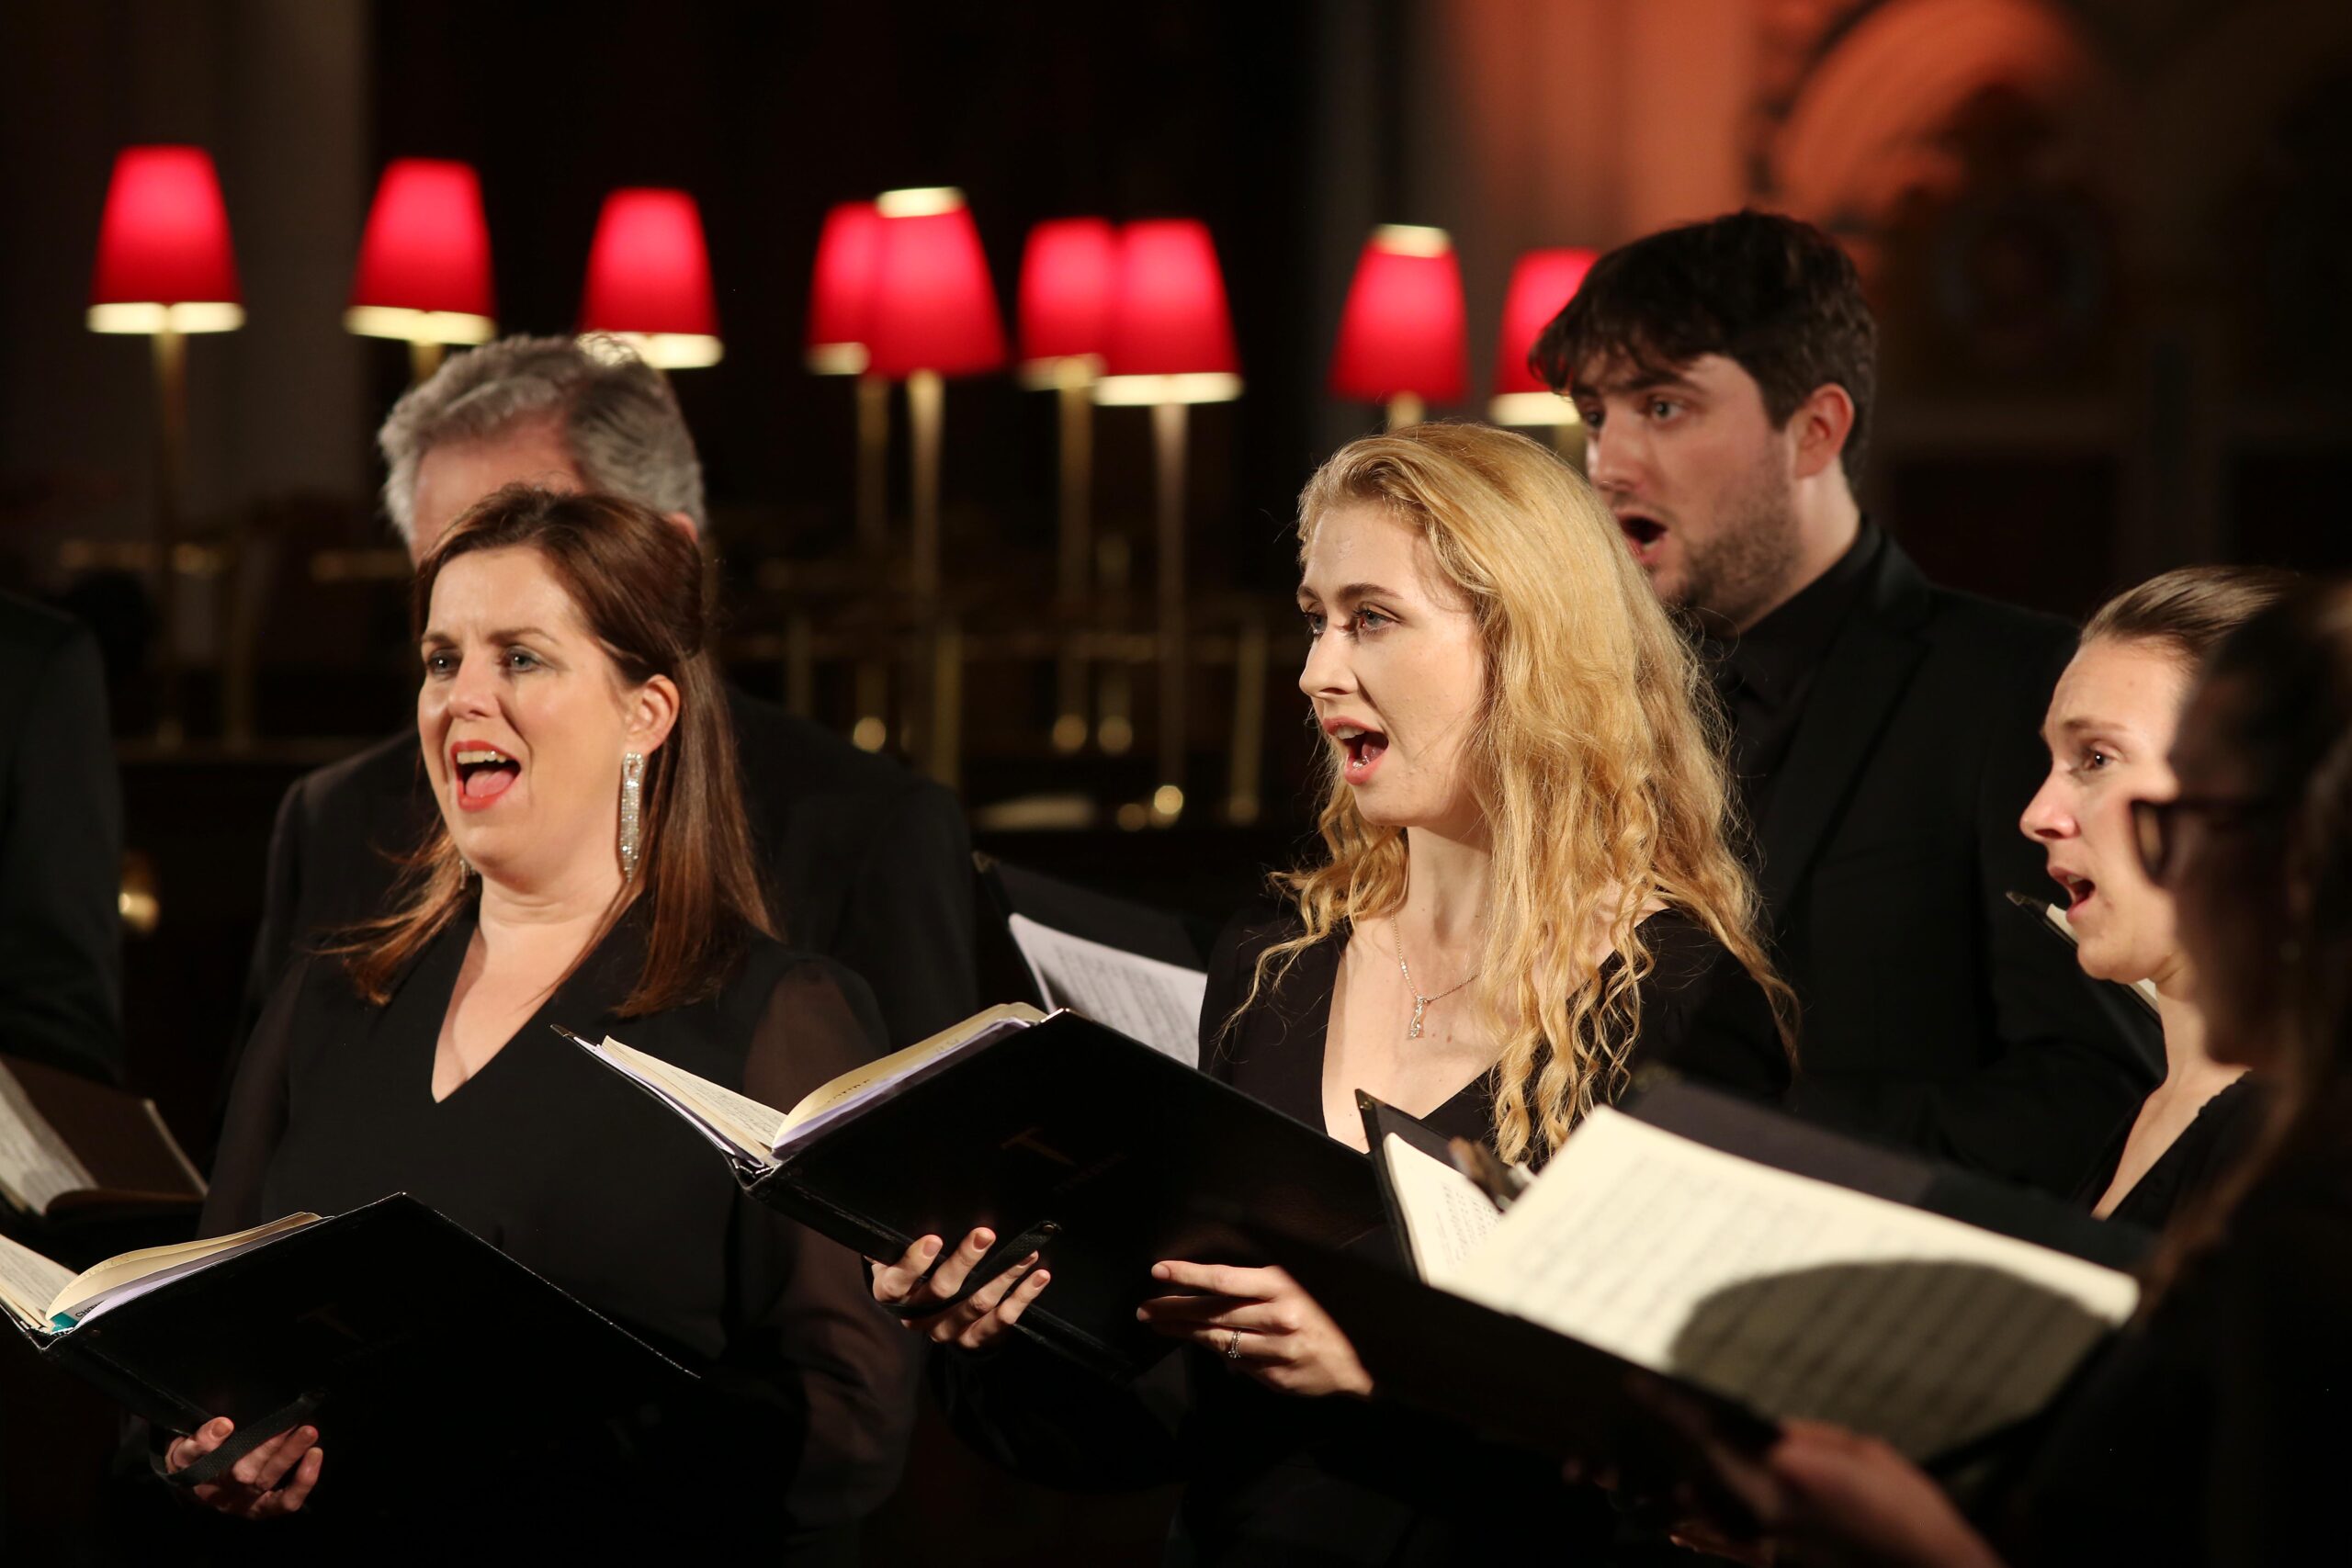 An Immersive Night of Choral Music